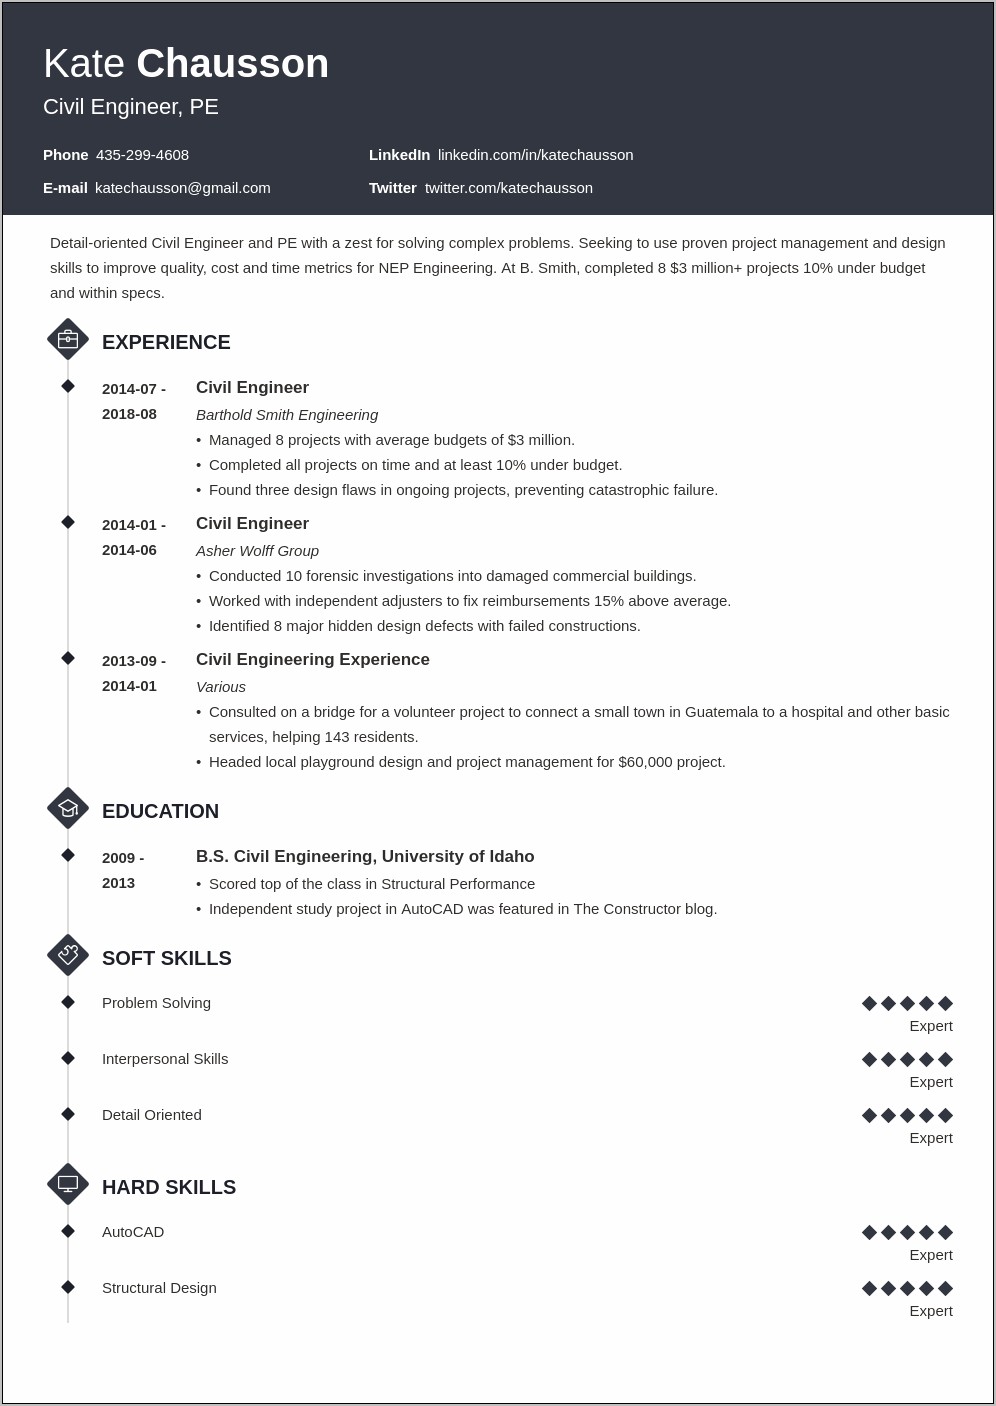 Free Resume Format Download For Civil Engineer